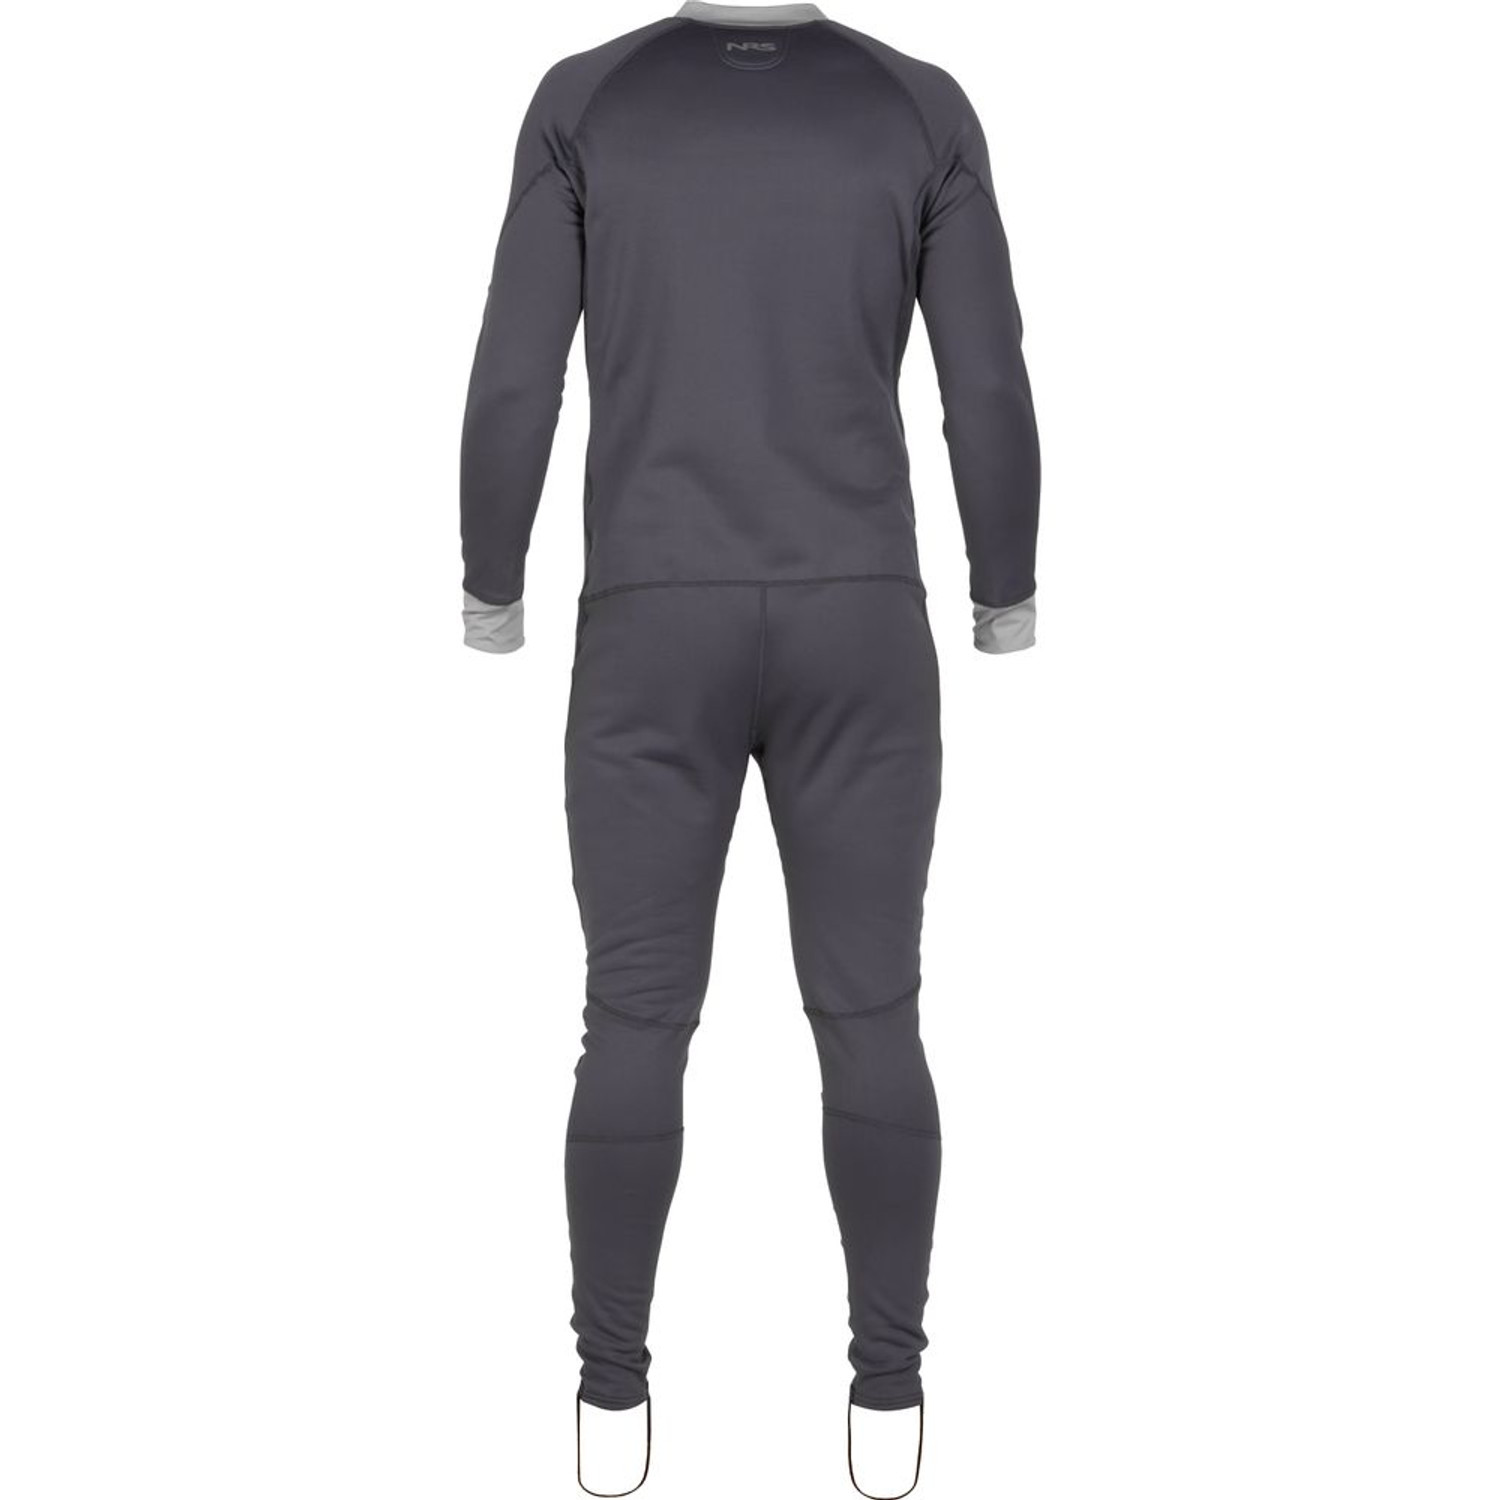 NRS Men's Expedition Weight Union Suit | Western Canoe Kayak Canada